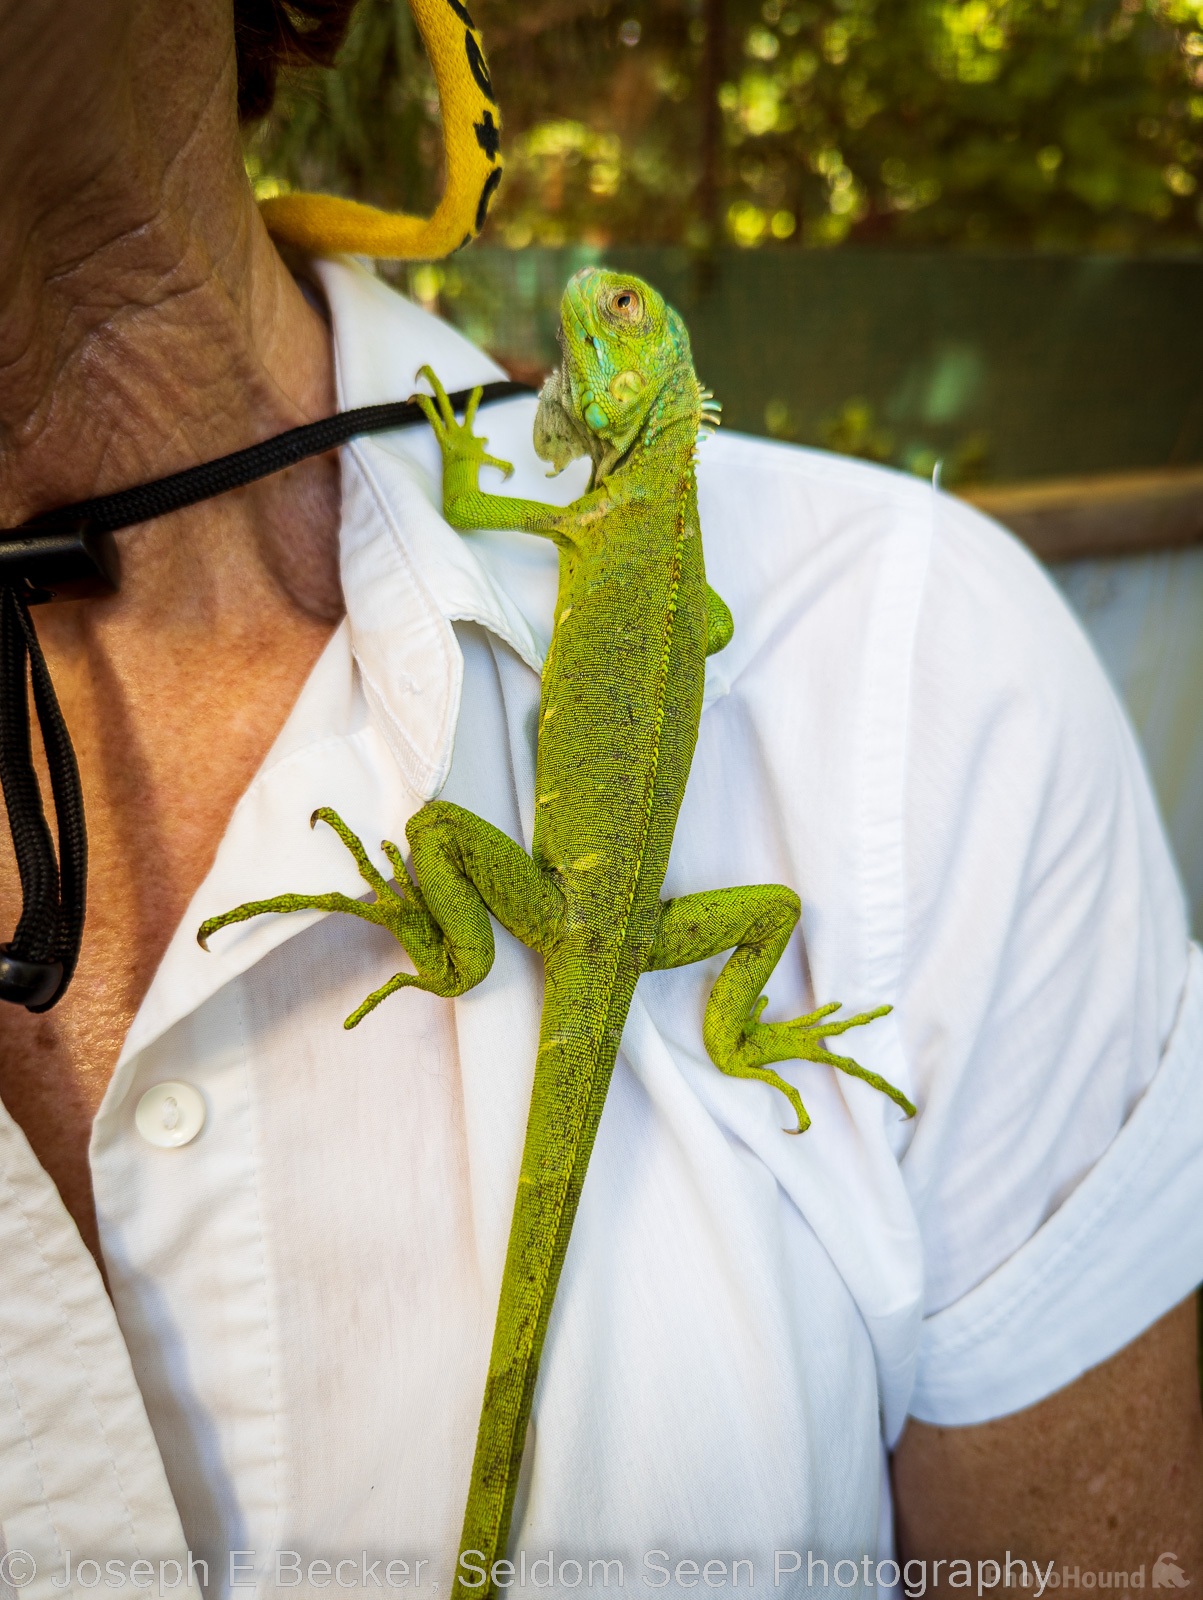 Image of Green Iguana Conservation Project by Joe Becker